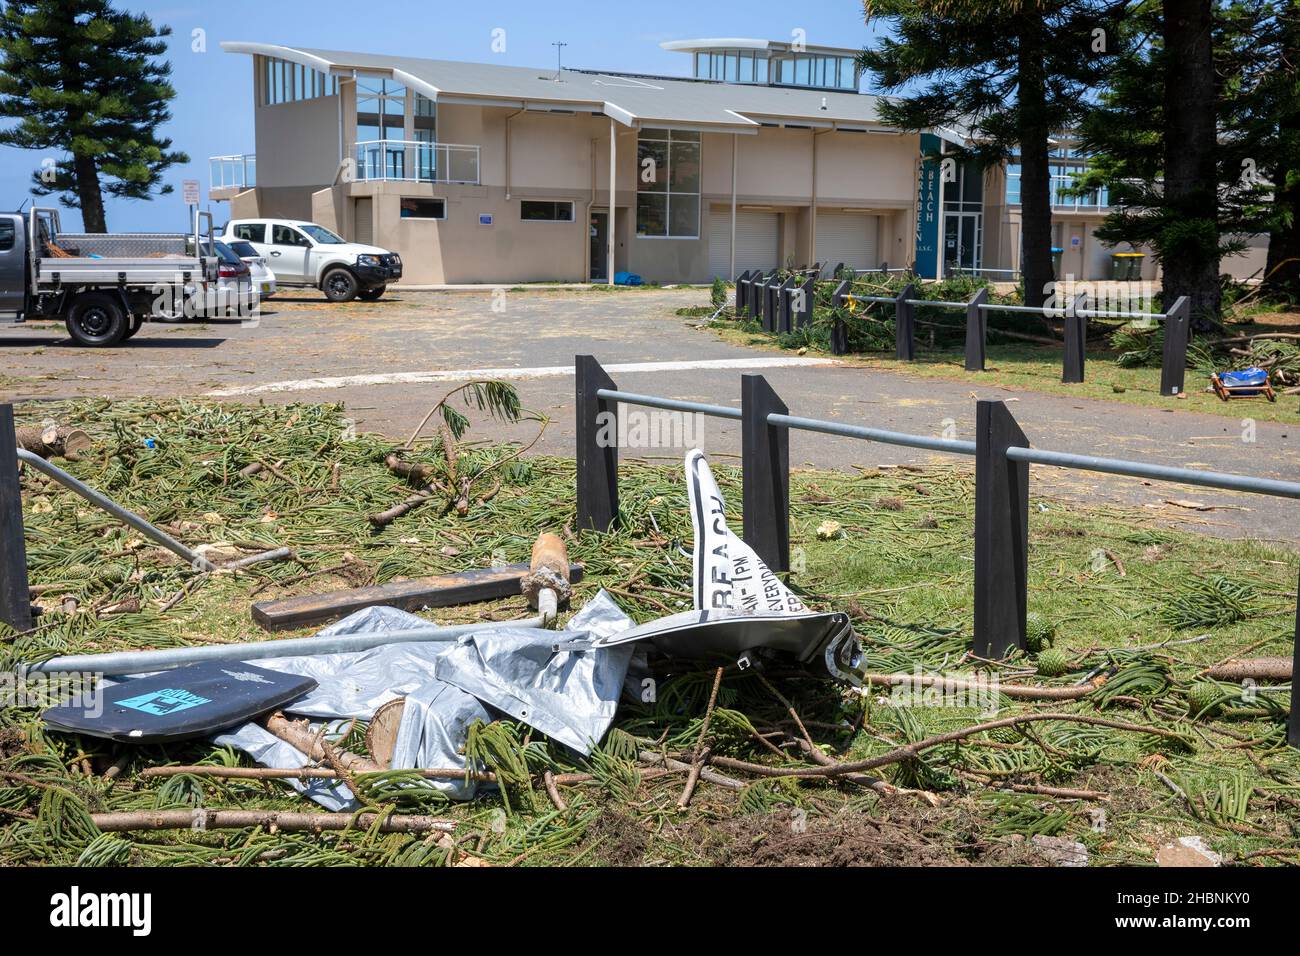 Freak storm led to lady losing her life near Narrabeen surf club as trees fell, day after the clean up begins at the site,Sydney,Australia Stock Photo